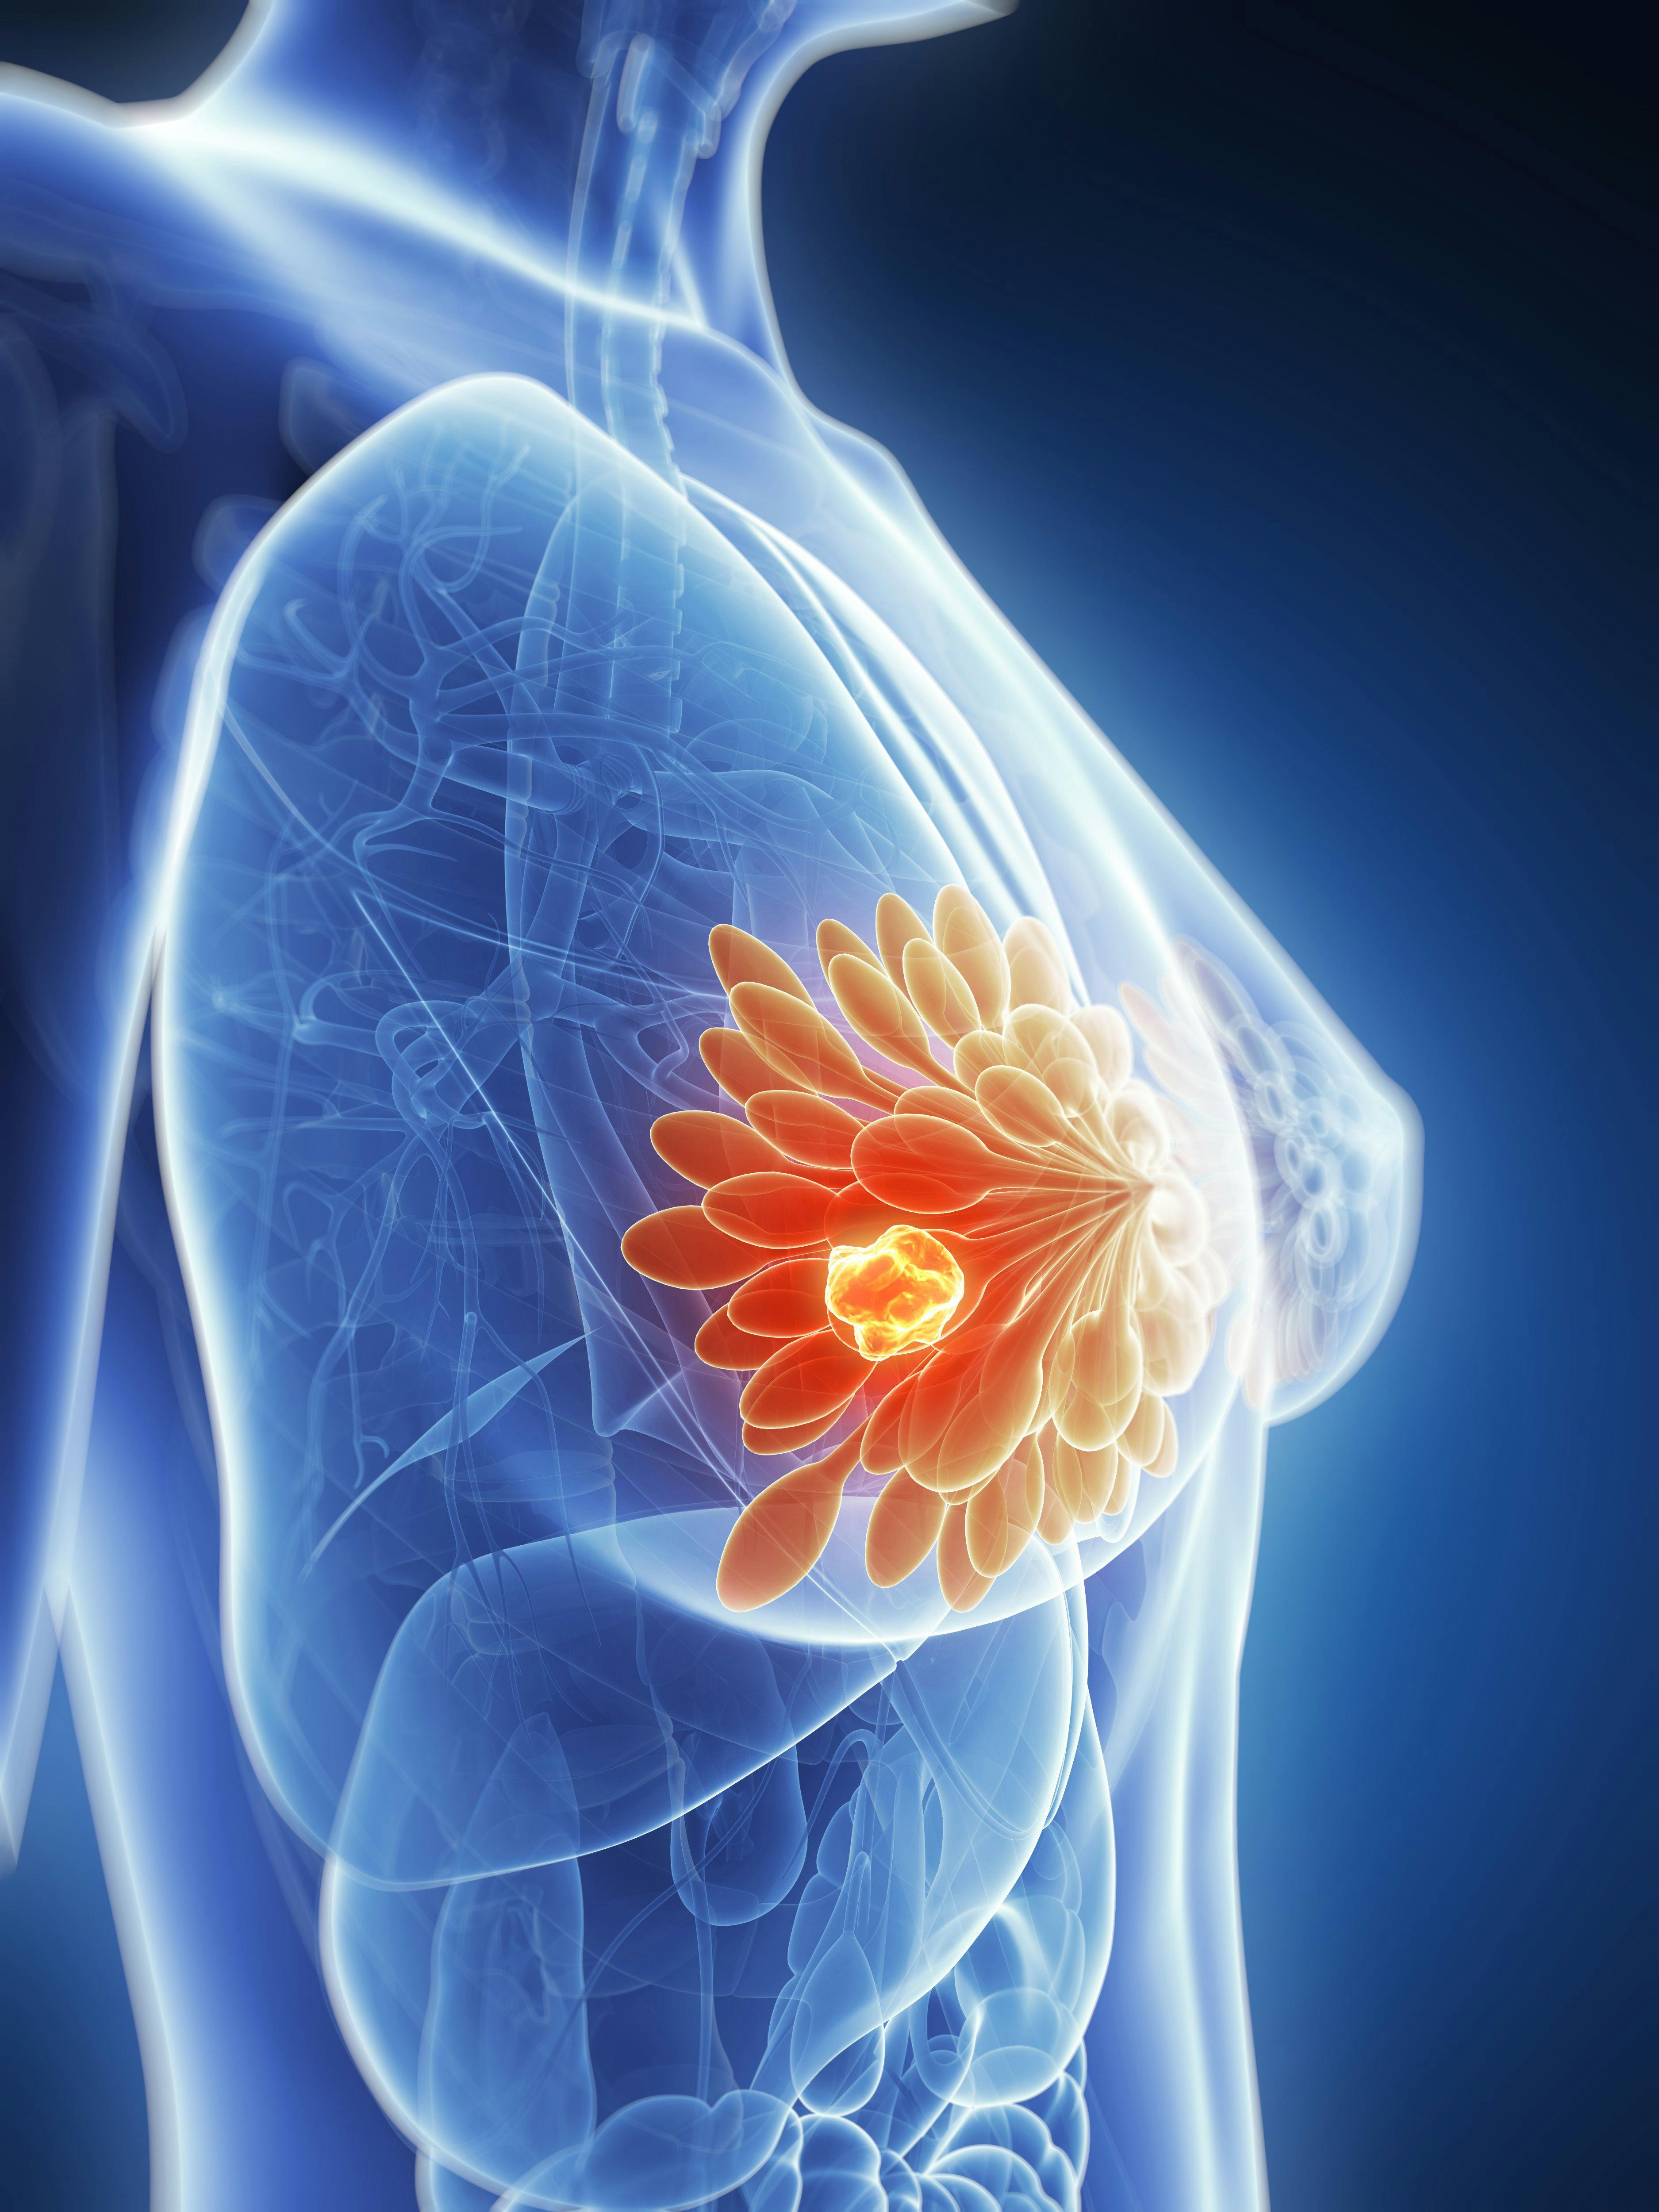 An additional 5 years of adjuvant aromatase inhibition following initial therapy may improve survival outcomes among disease-free patients with postmenopausal breast cancer, according to results from the phase 3 AERAS study.